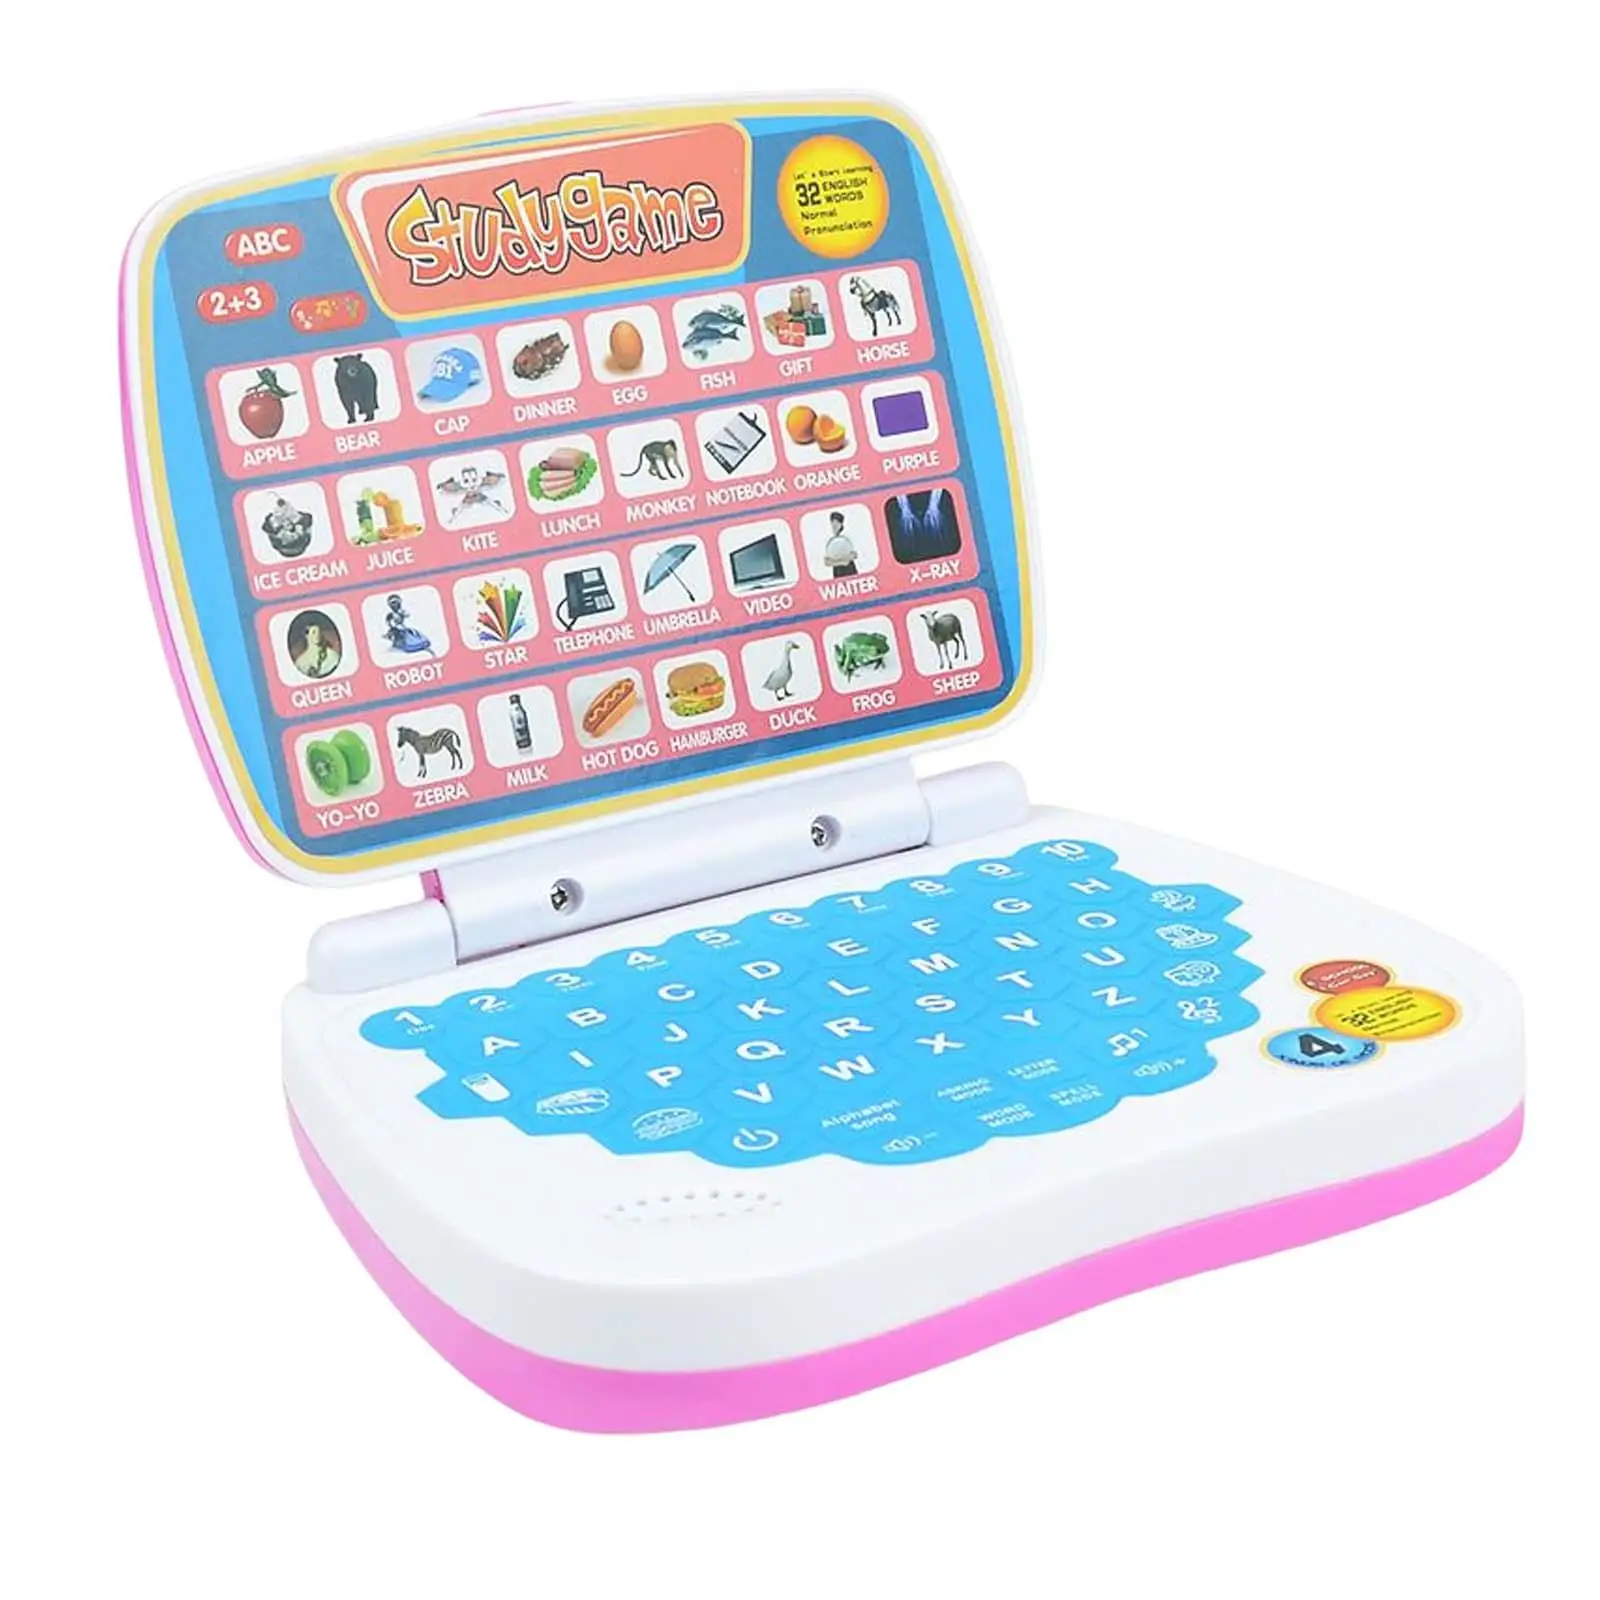 Multifunction Kids Laptop Toy,English Early Education Toy,Computer Child Interactive Learning Pad Tablet for Toddler Girls Boys